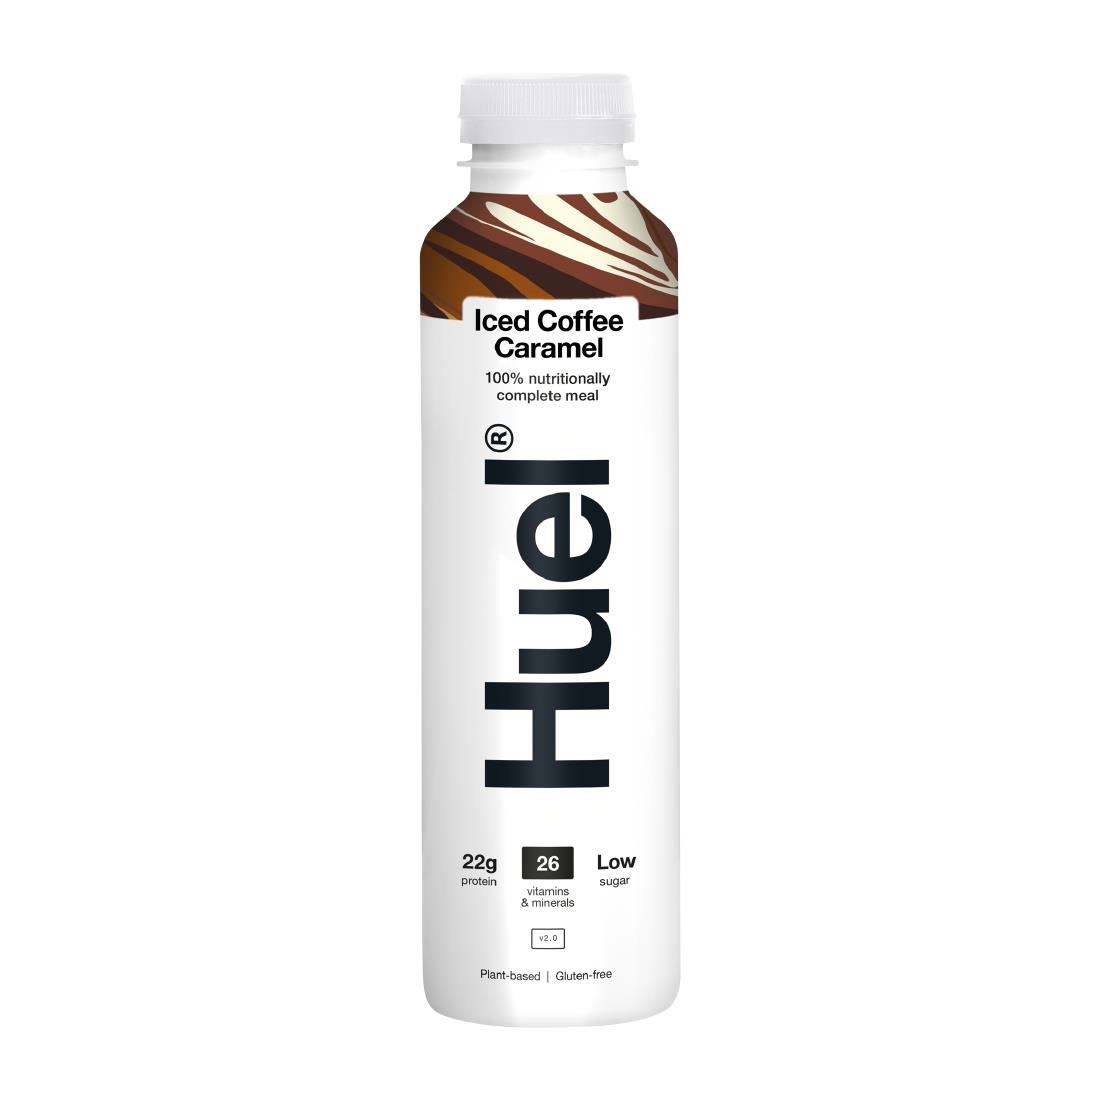 HUEL 100 Nutritionally Complete Meal Drink - Iced Coffee Caramel 500ml Pack of 8 (HS547)